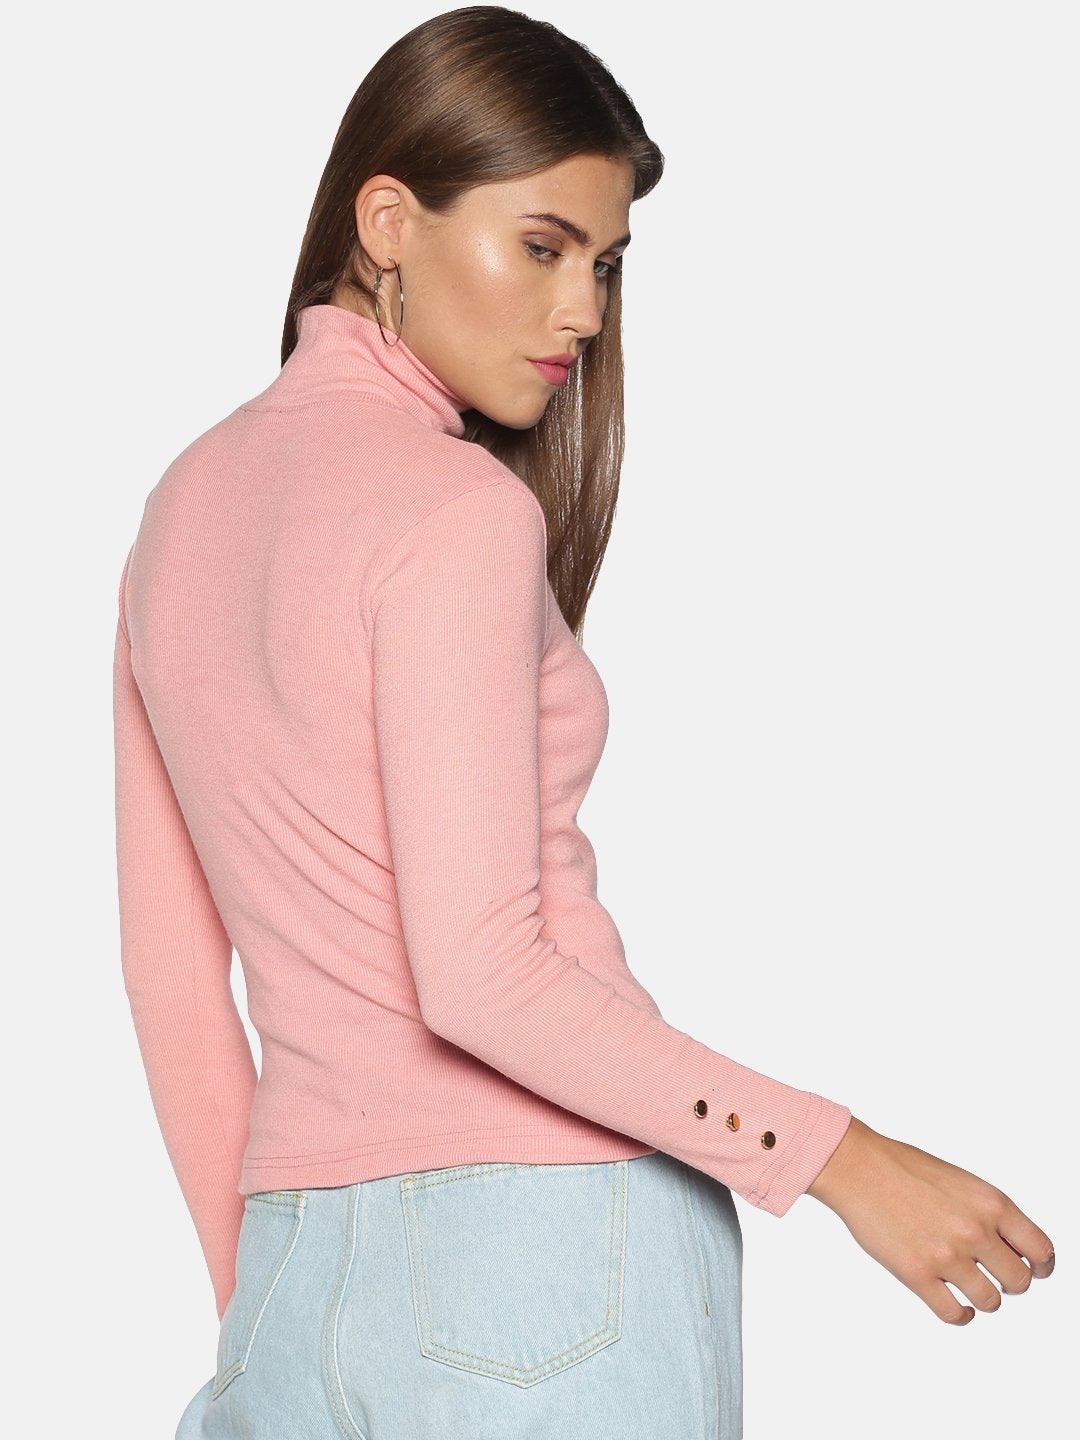 IS.U Pink Long Sleeve Knitted Top